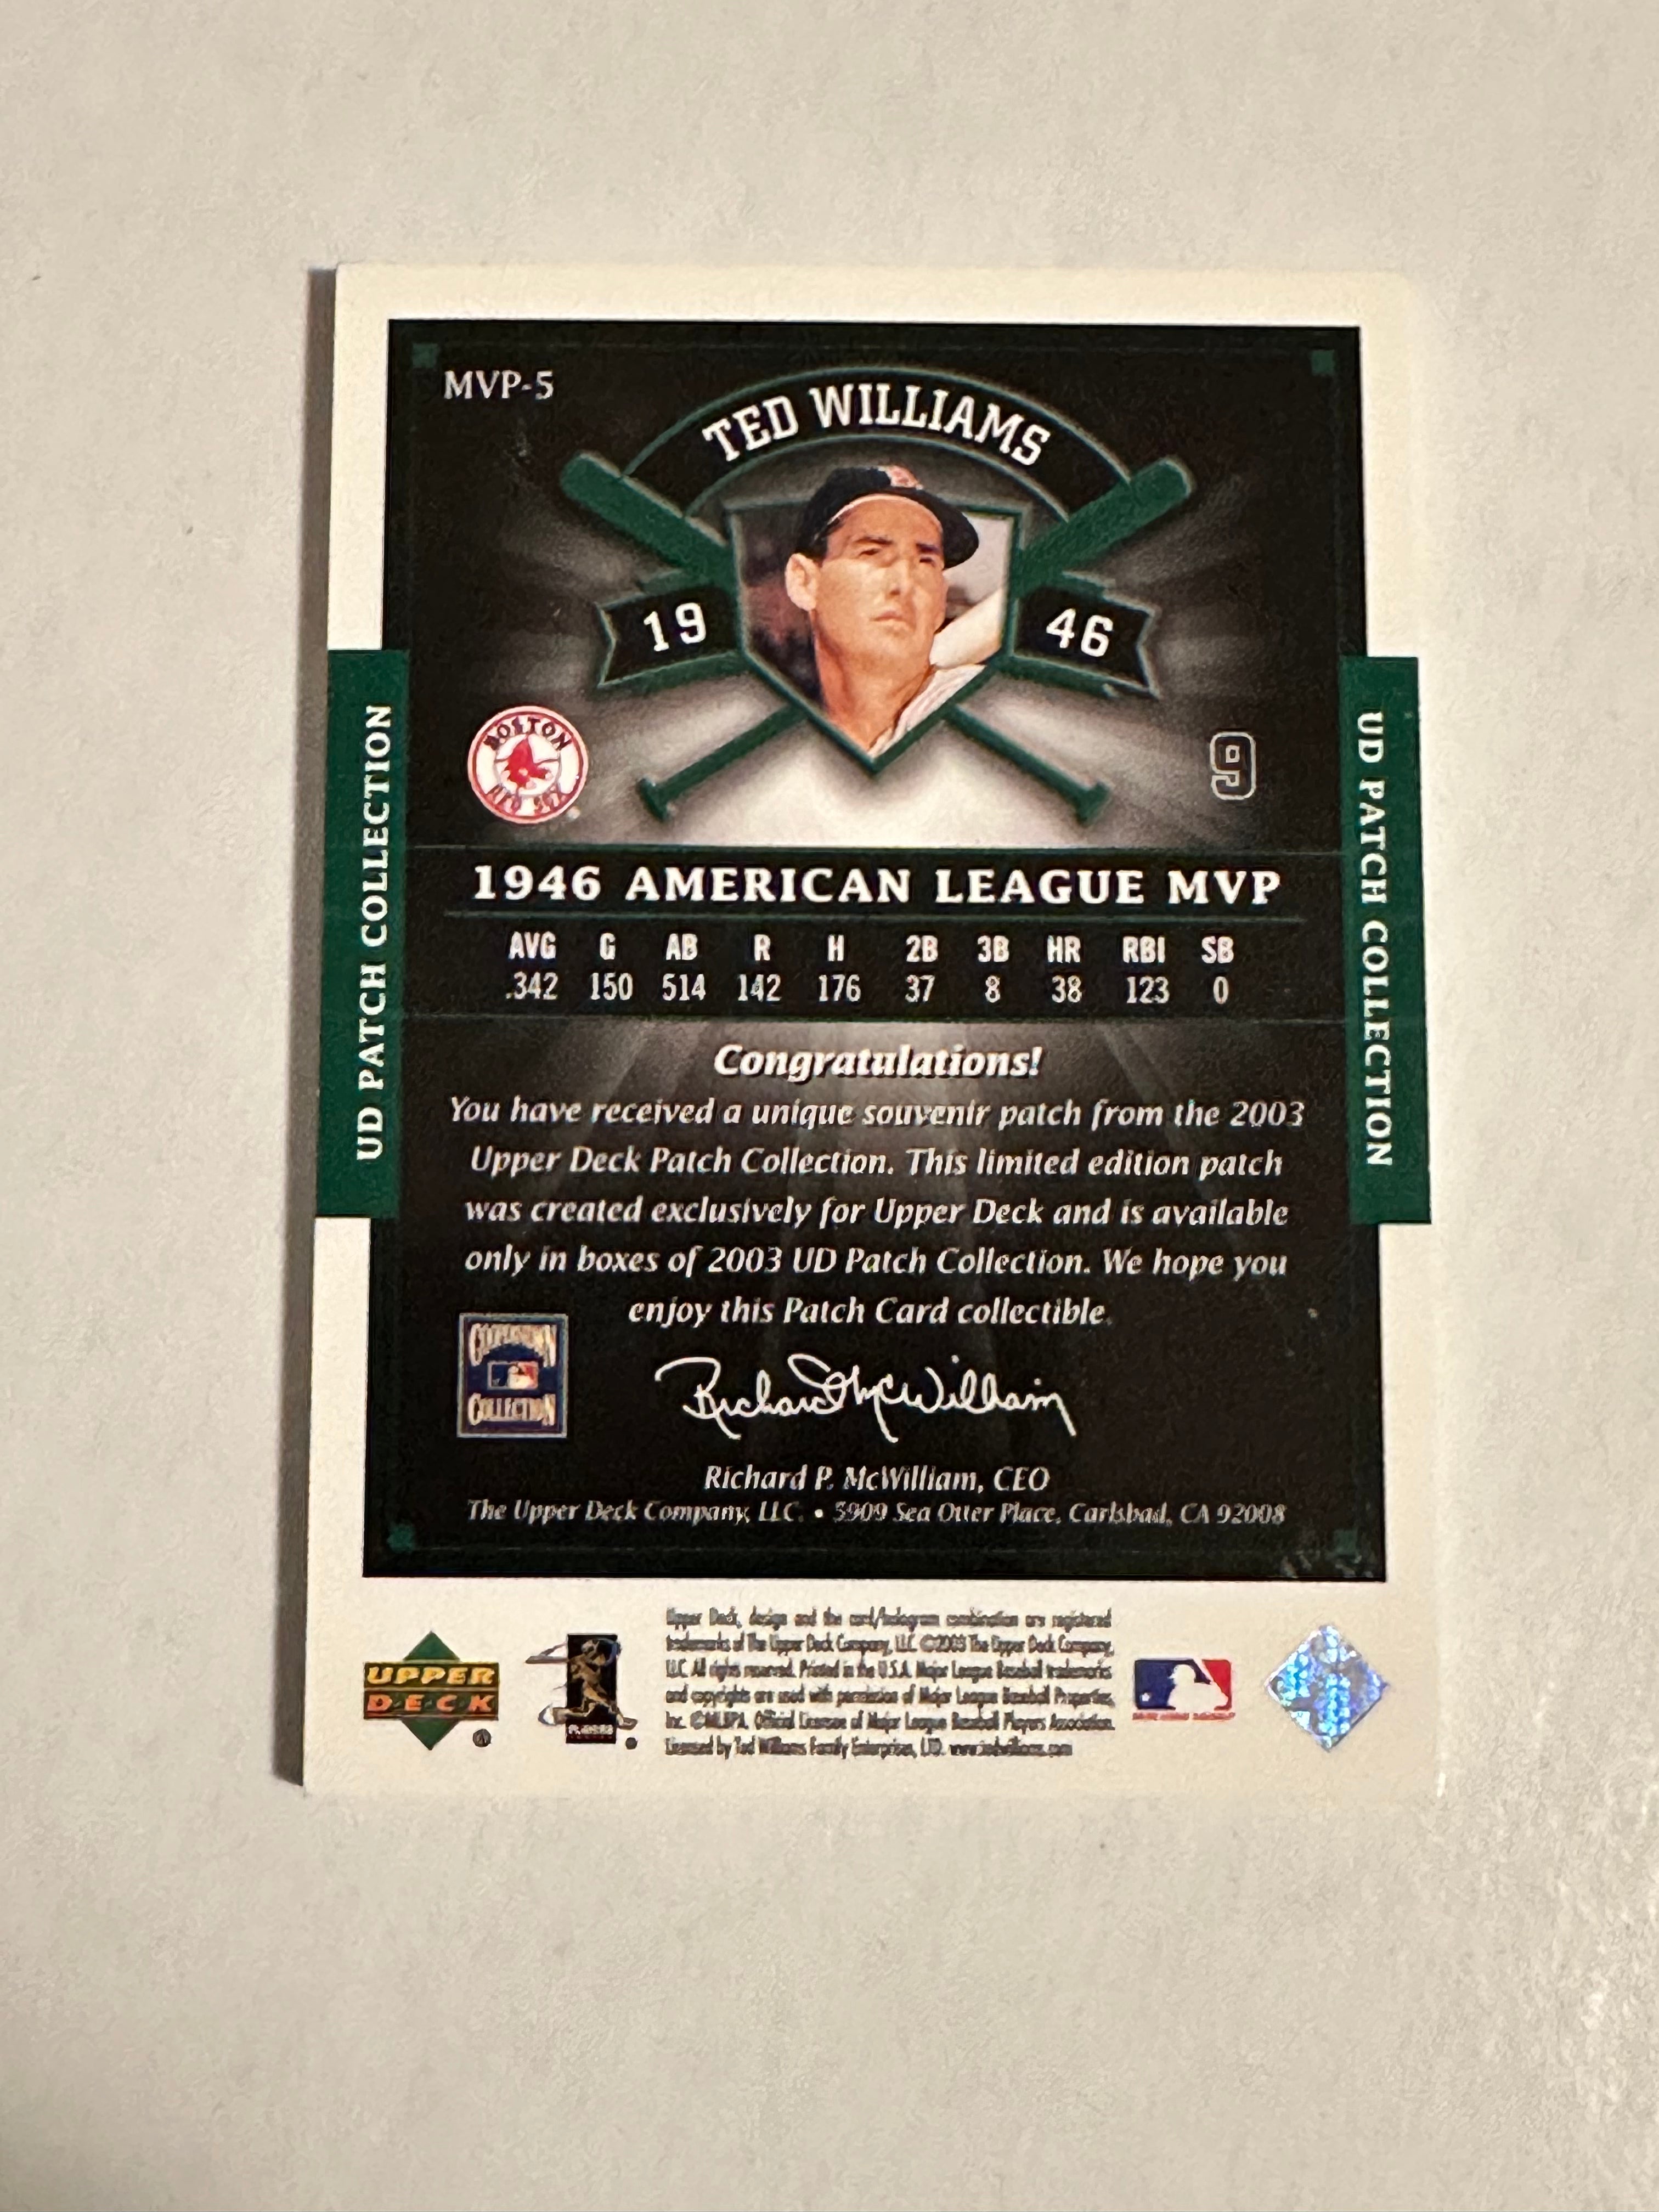 Ted Williams, Boston Red Sox, baseball, rare commemorative, patch, insert card